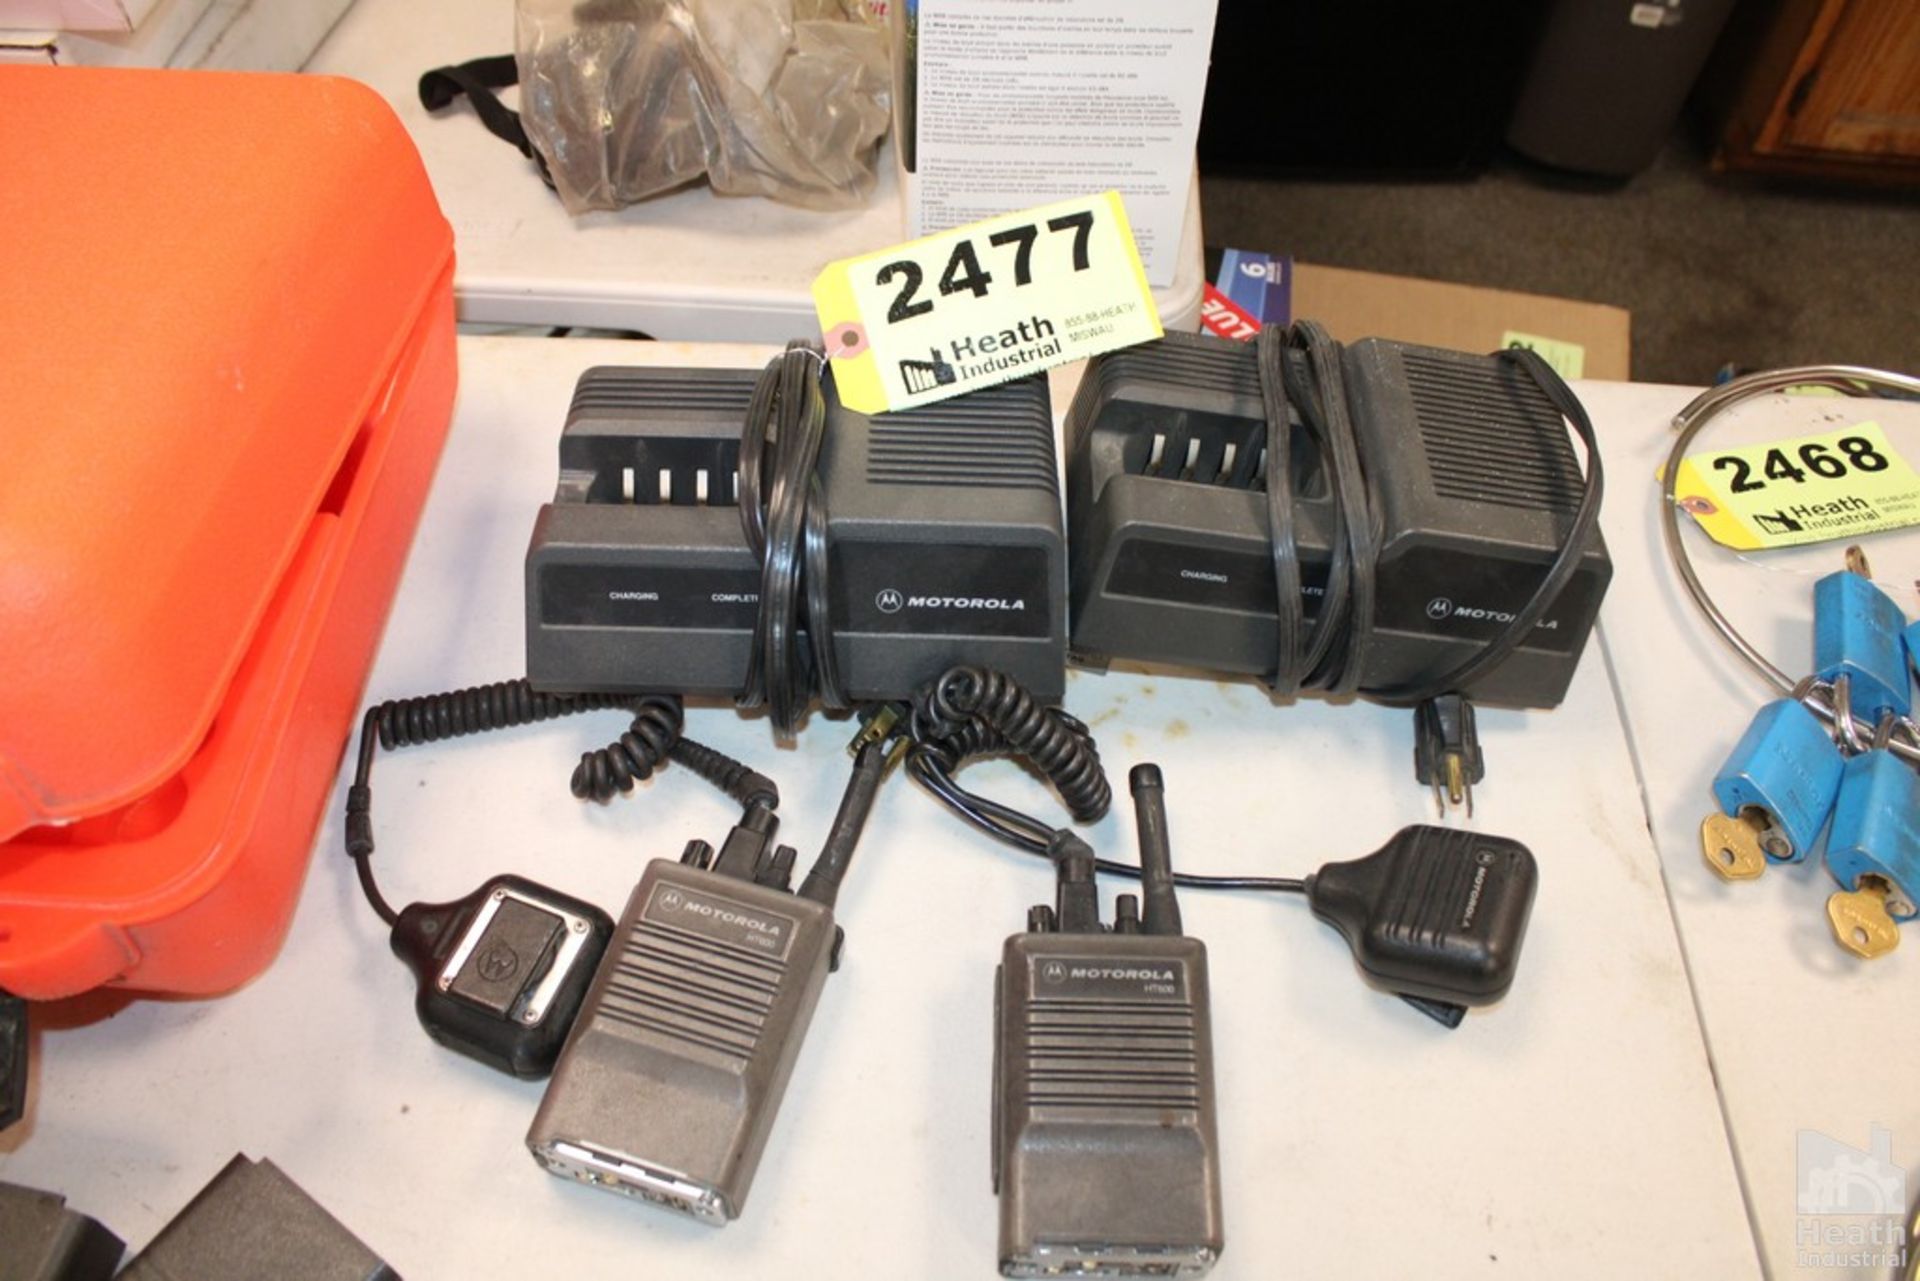 (2) MOTOROLA HT 600 2-WAY RADIOS WITH CHARGERS